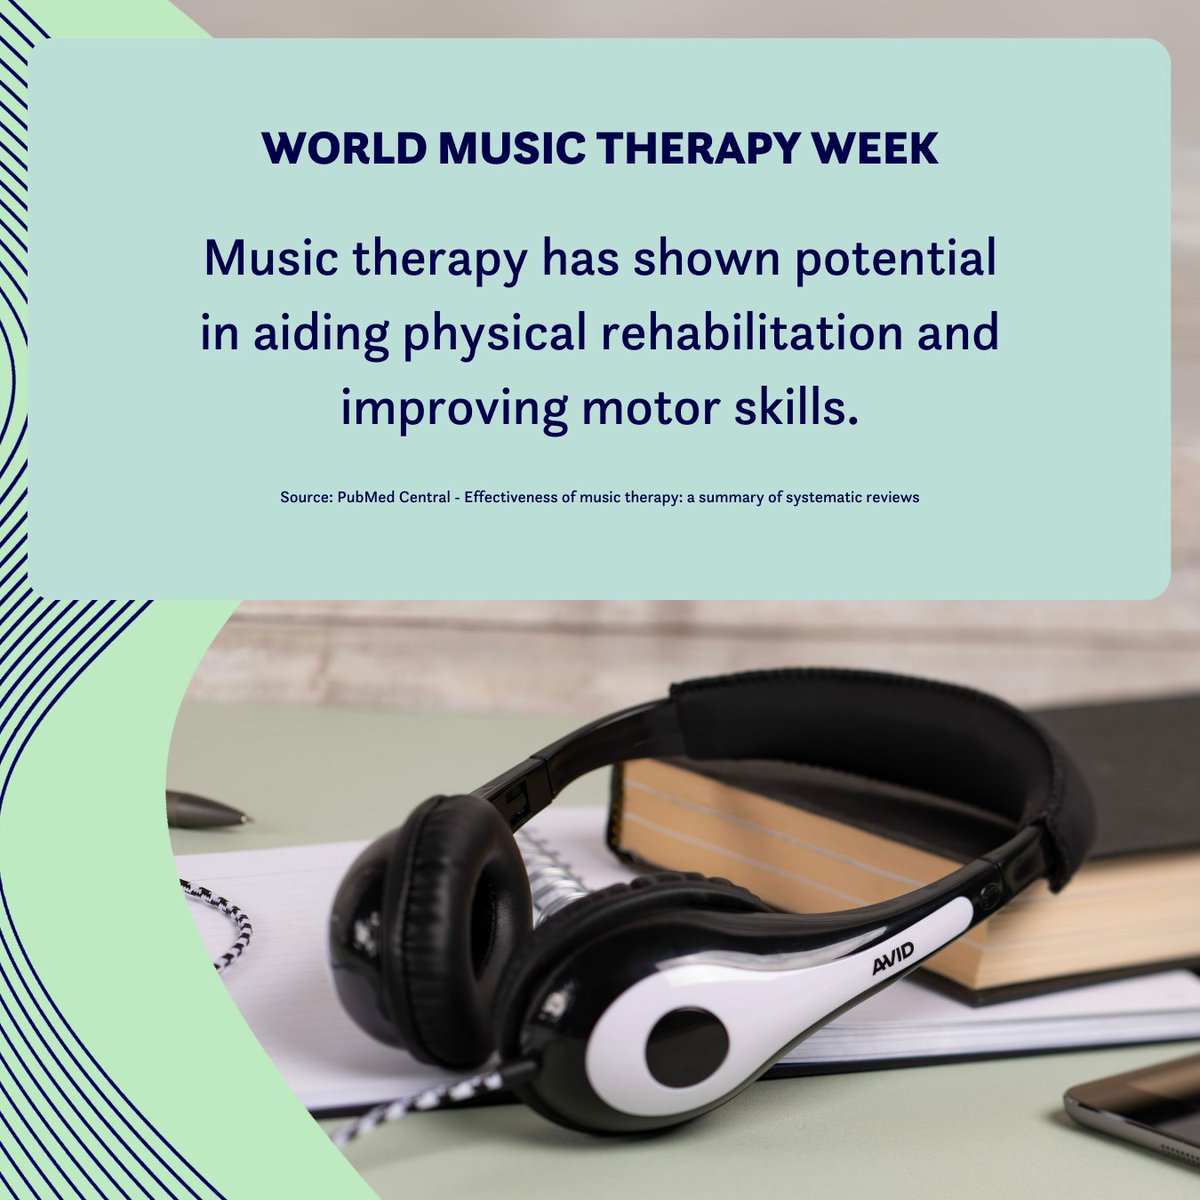 Happy #WorldMusicTherapyWeek! We're raising awareness by sharing some enlightening insights about the benefits of music therapy and saying thank you to music therapists around the world. 🎶 How does music enrich your life? Check out @AMTAInc or @WFMTinfo to learn more about it!